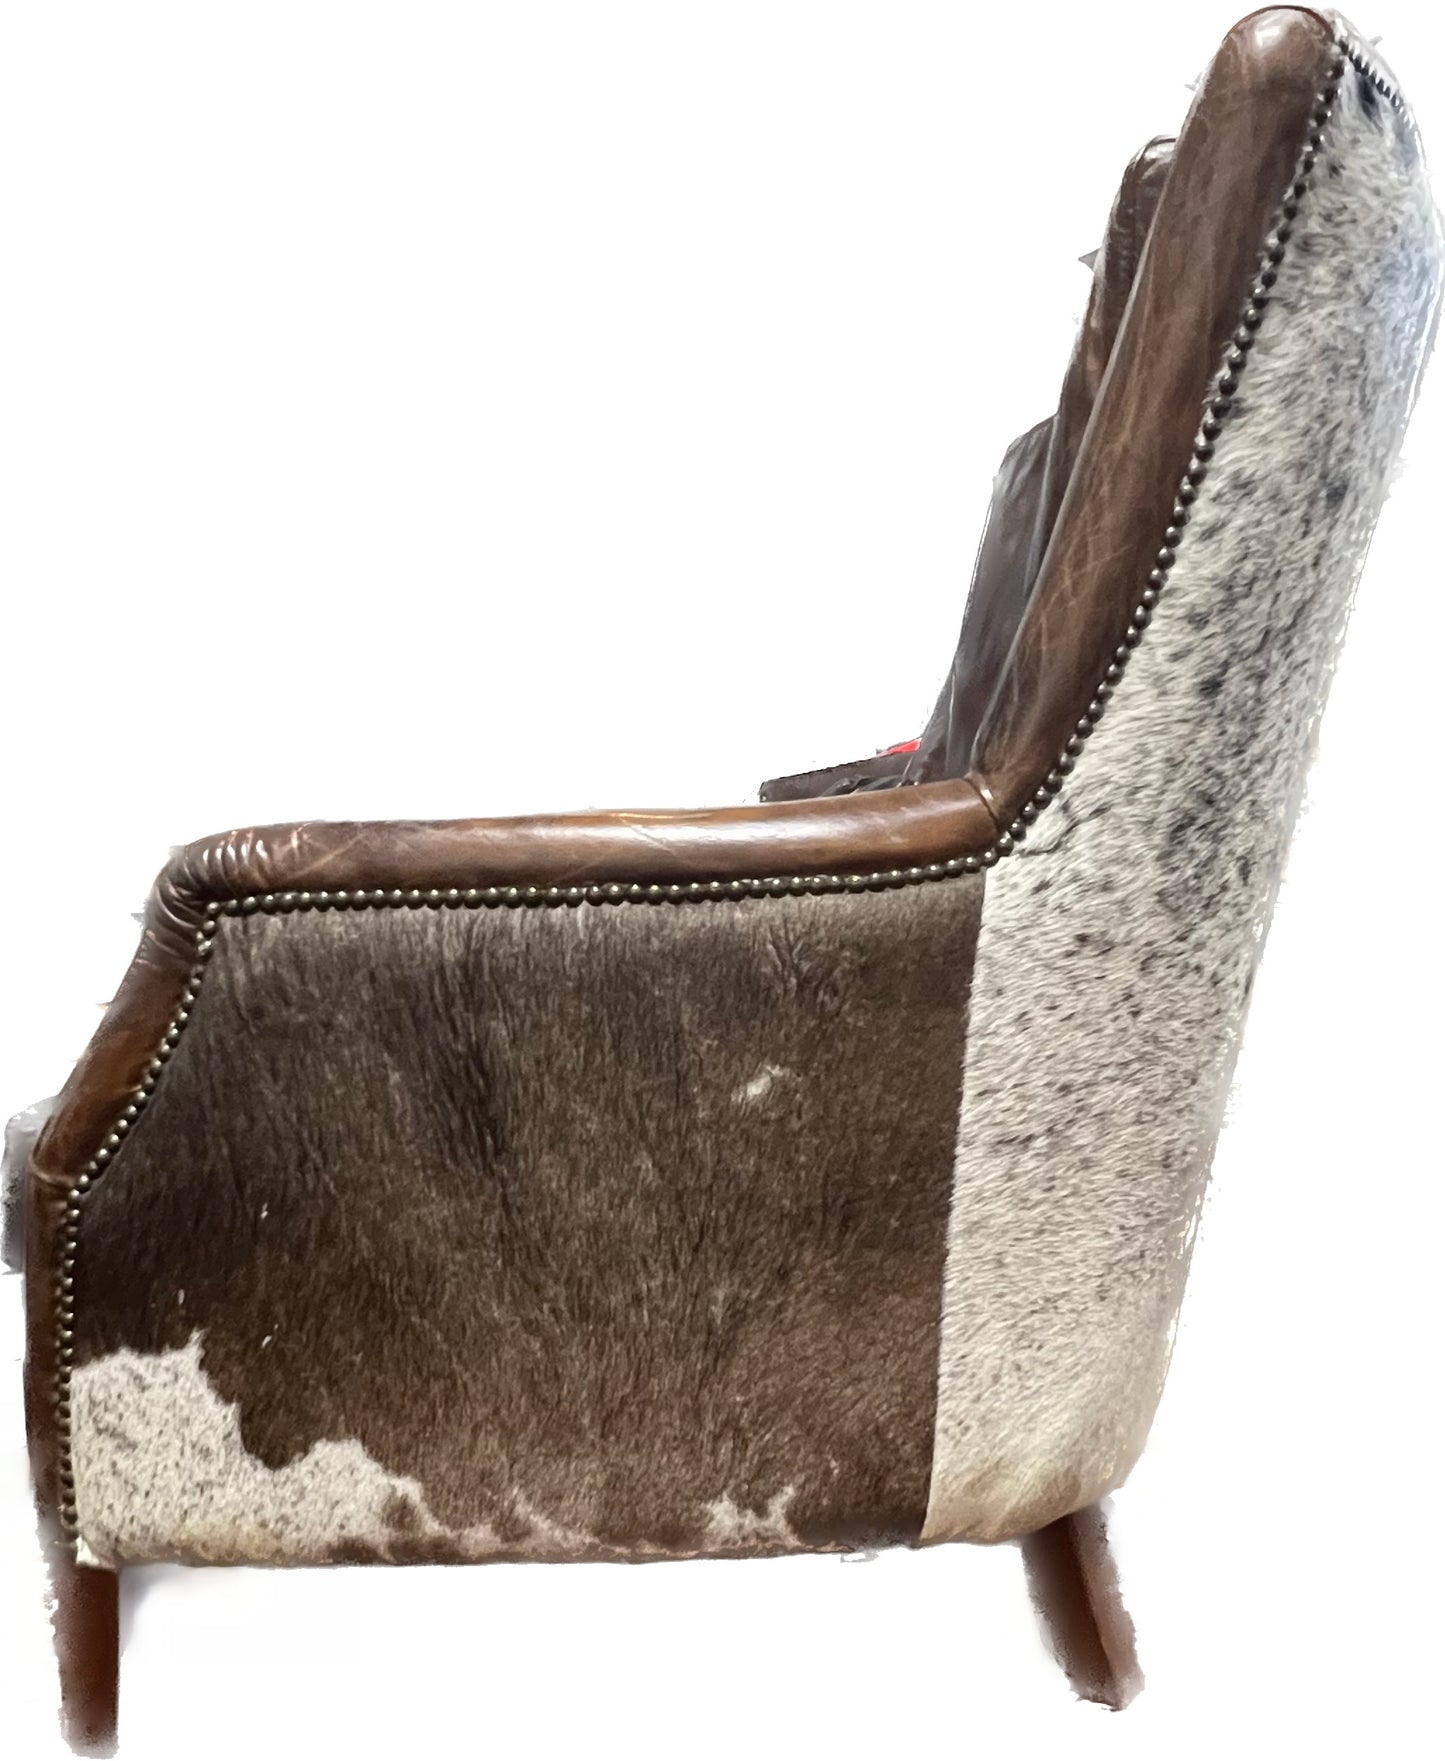 20th century vintage statement cowhide and brown leather club chair